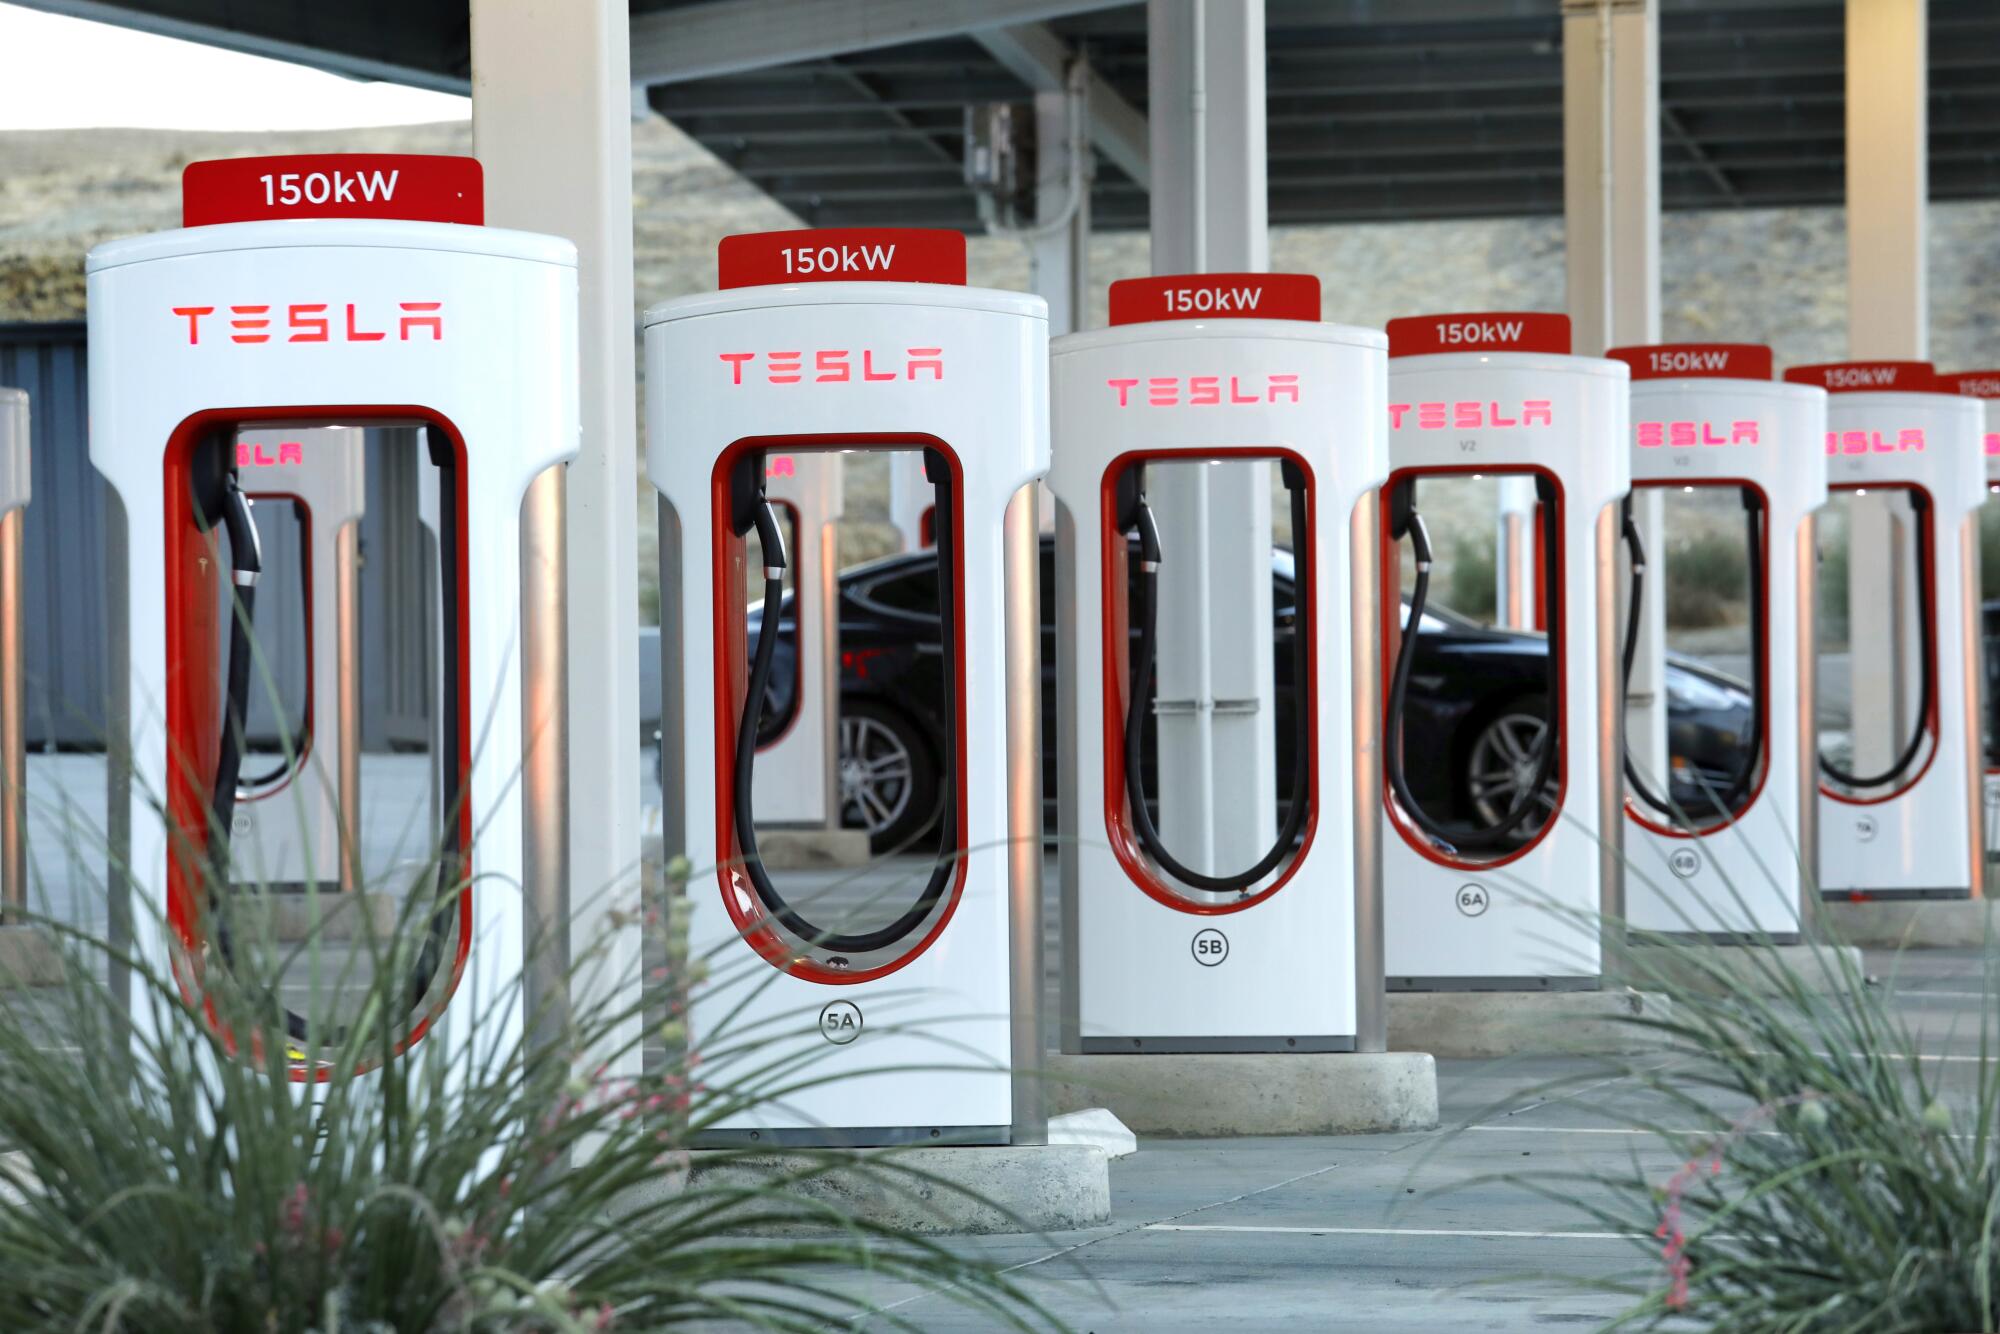 A car pulls up to a row of electric vehicle superchargers.